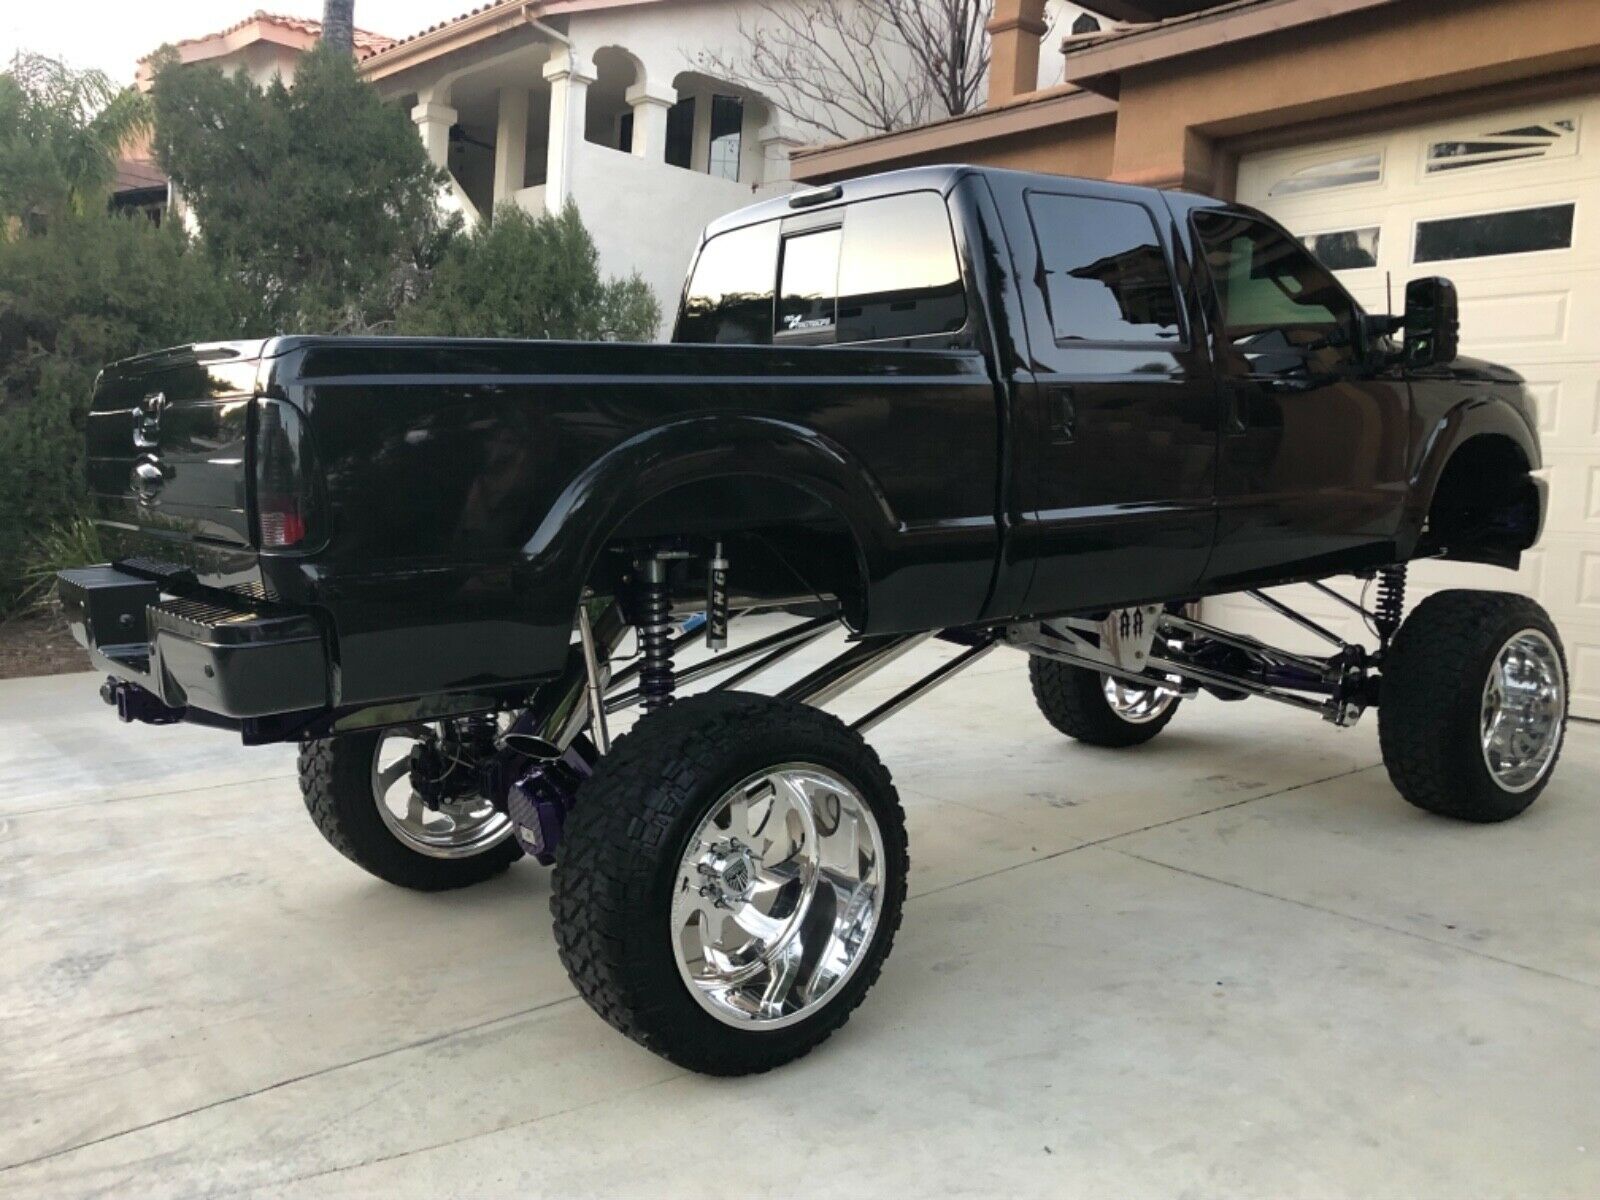 2014 Ford F-250 Platinum Monster Truck for Sale - (TX)